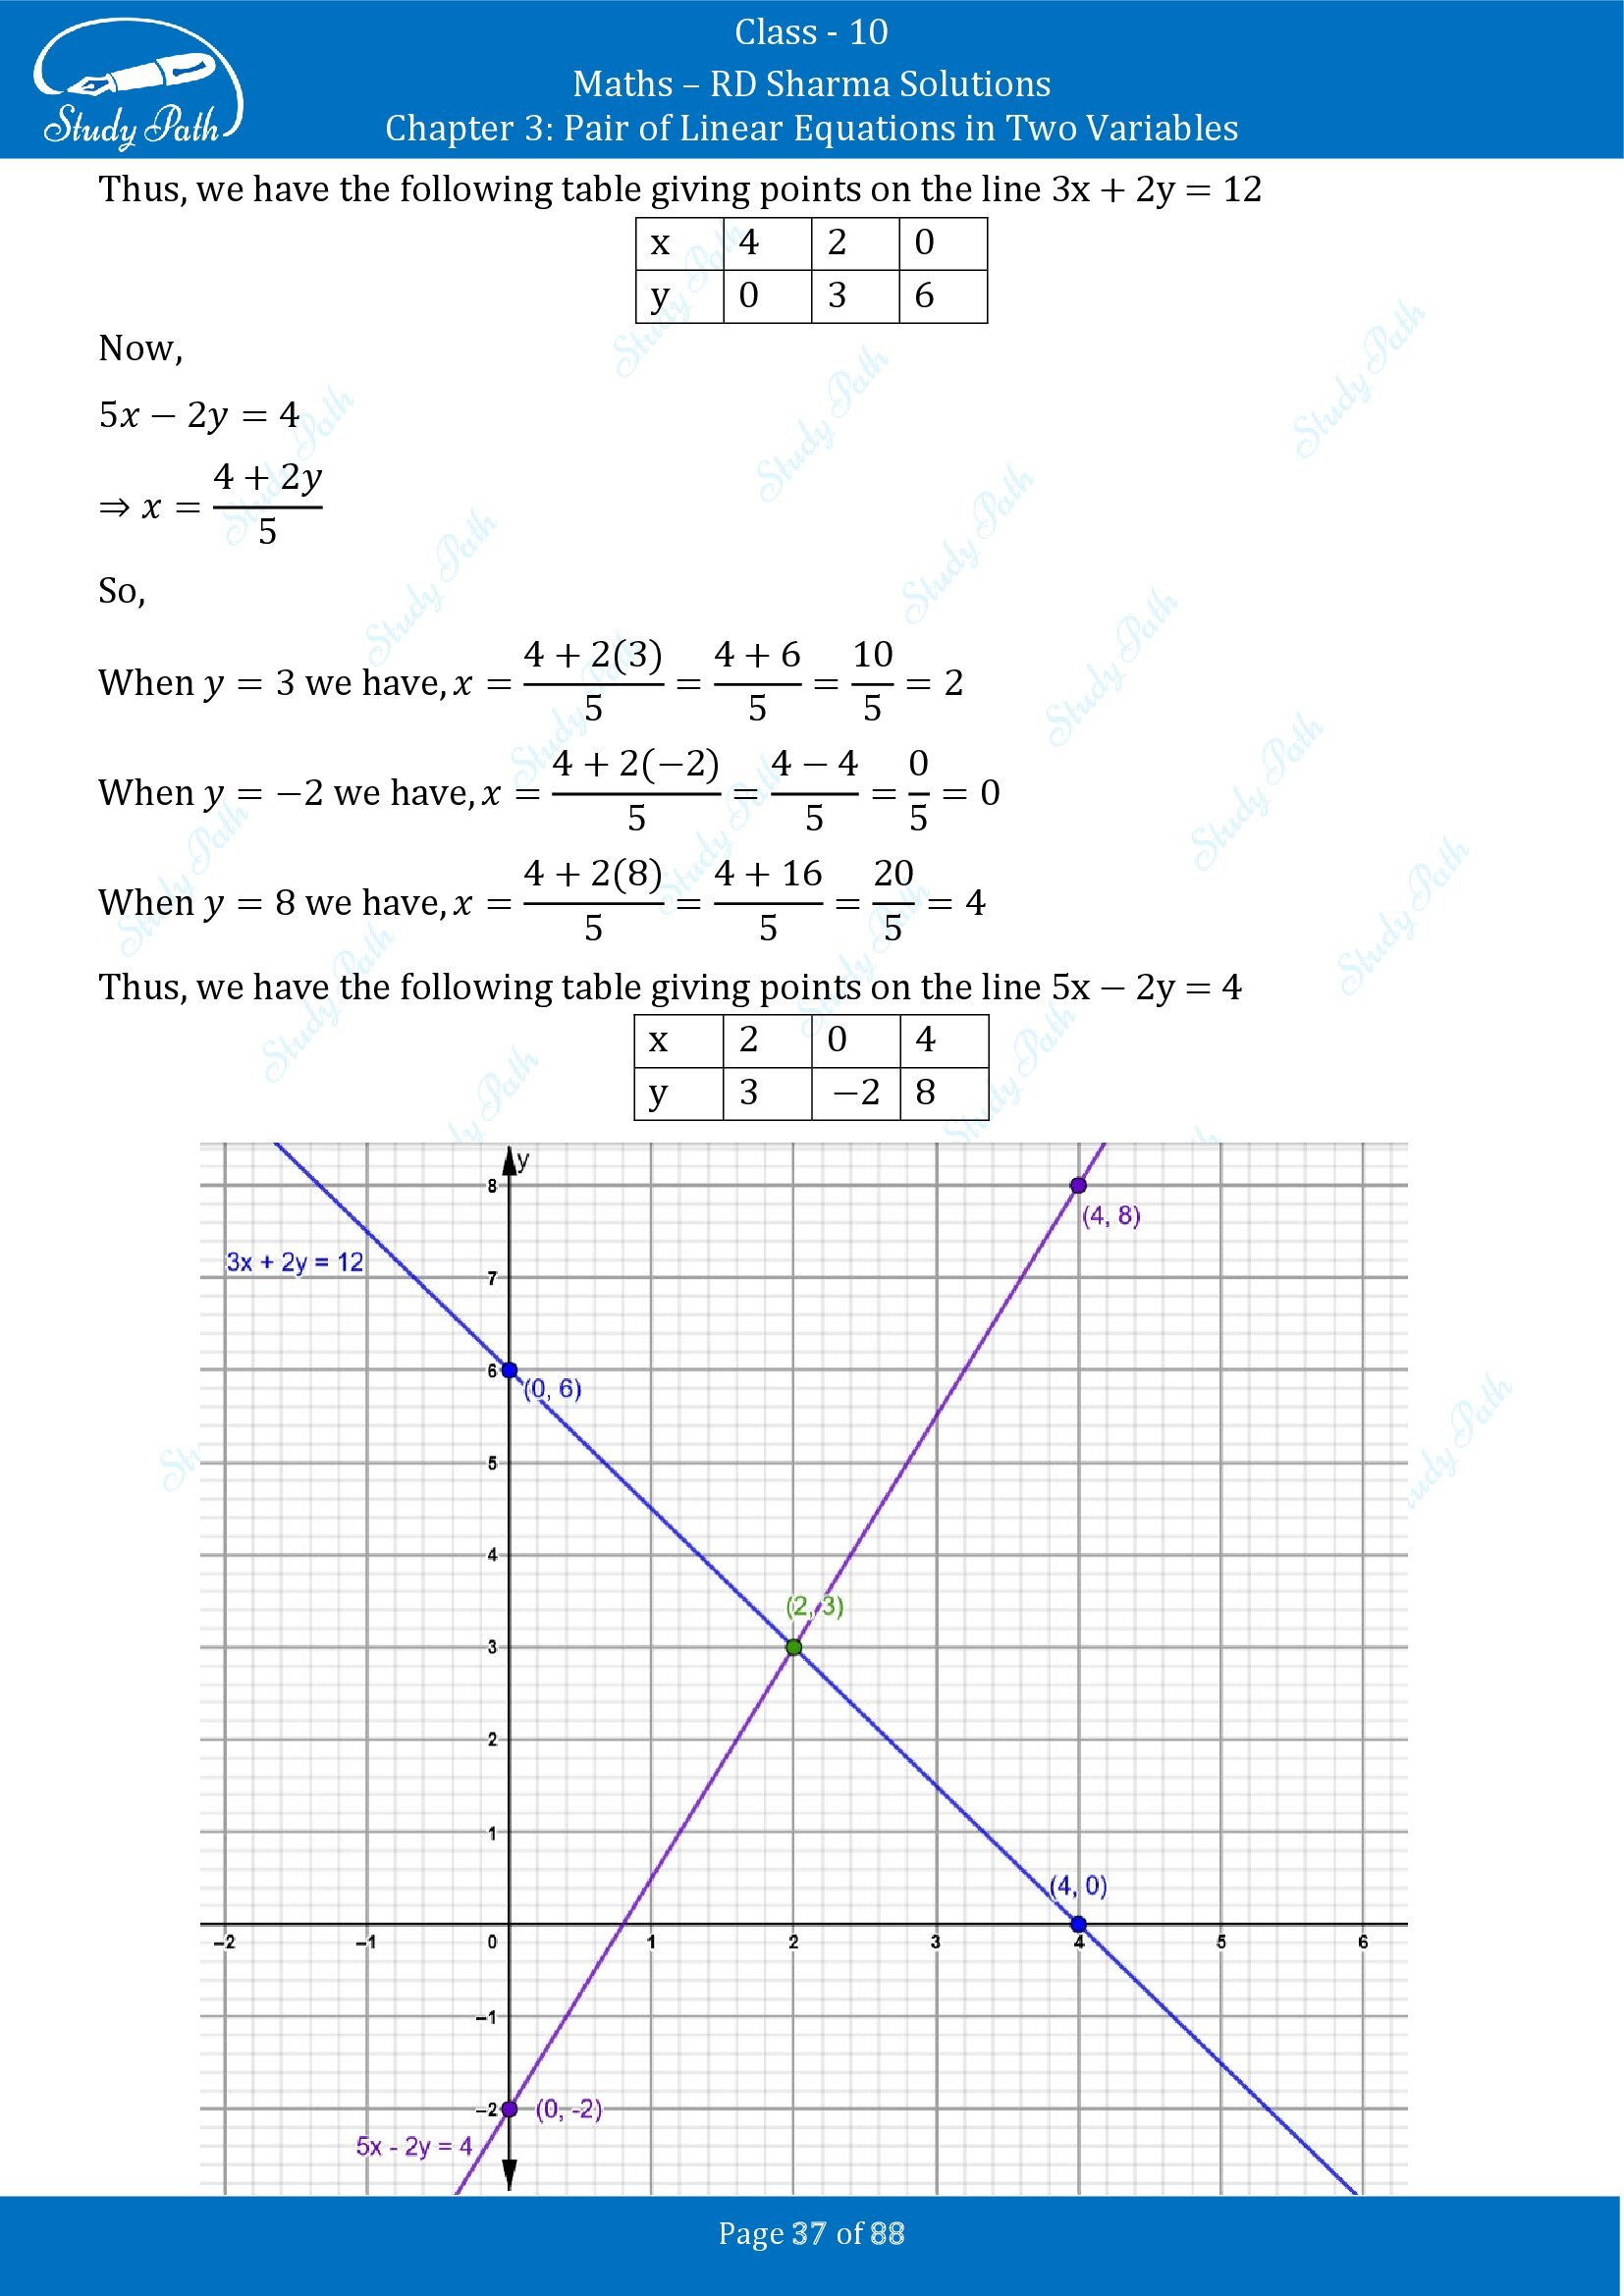 RD Sharma Solutions Class 10 Chapter 3 Pair of Linear Equations in Two Variables Exercise 3.2 00037